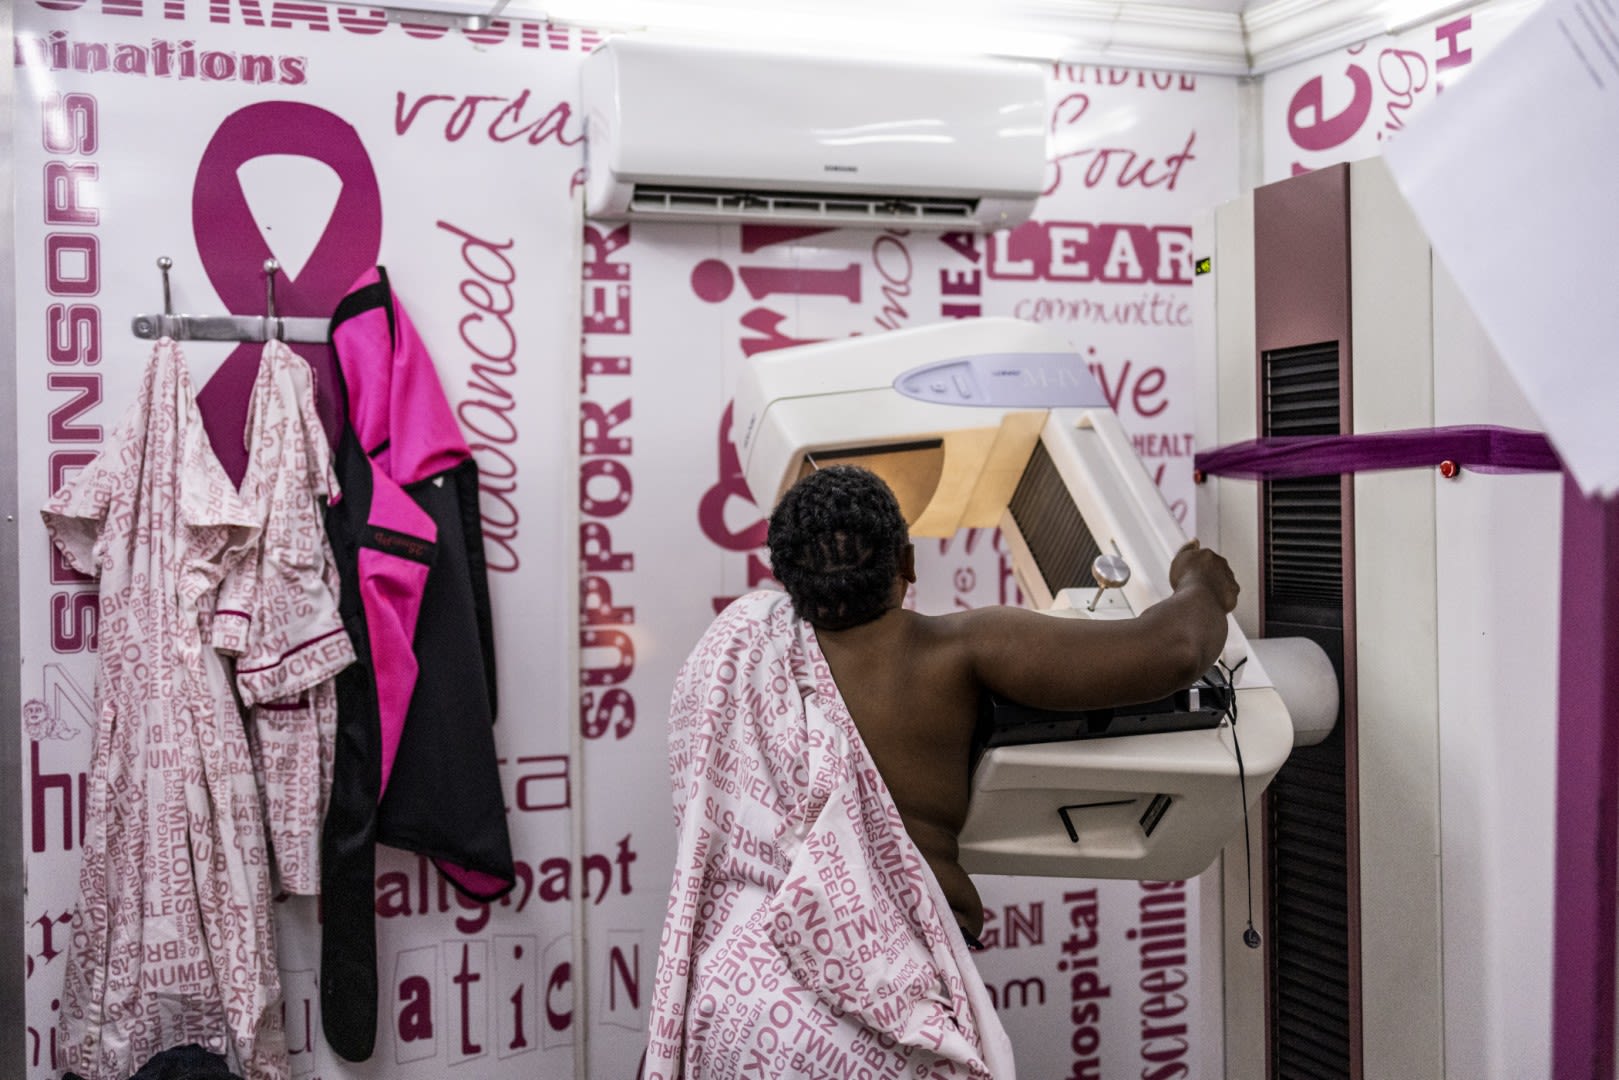 Mammography is not banned in Switzerland, suspended in Canada